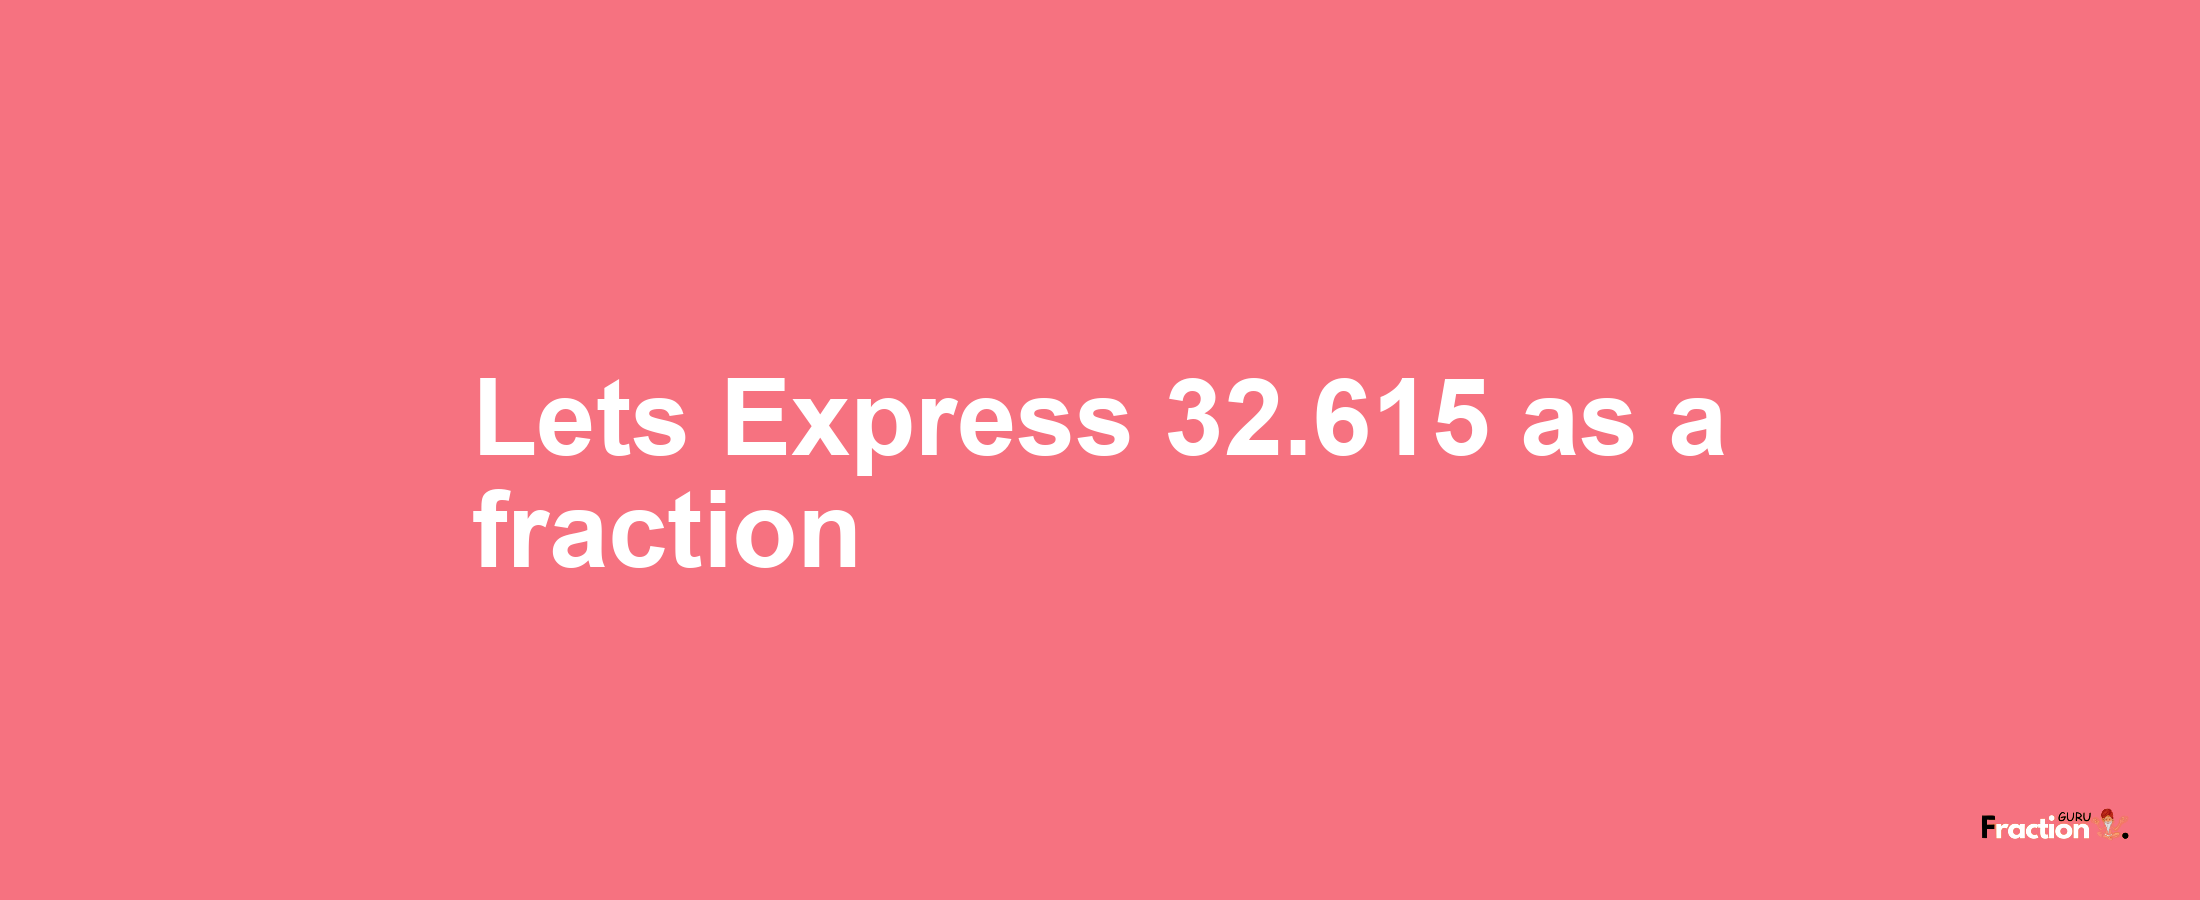 Lets Express 32.615 as afraction